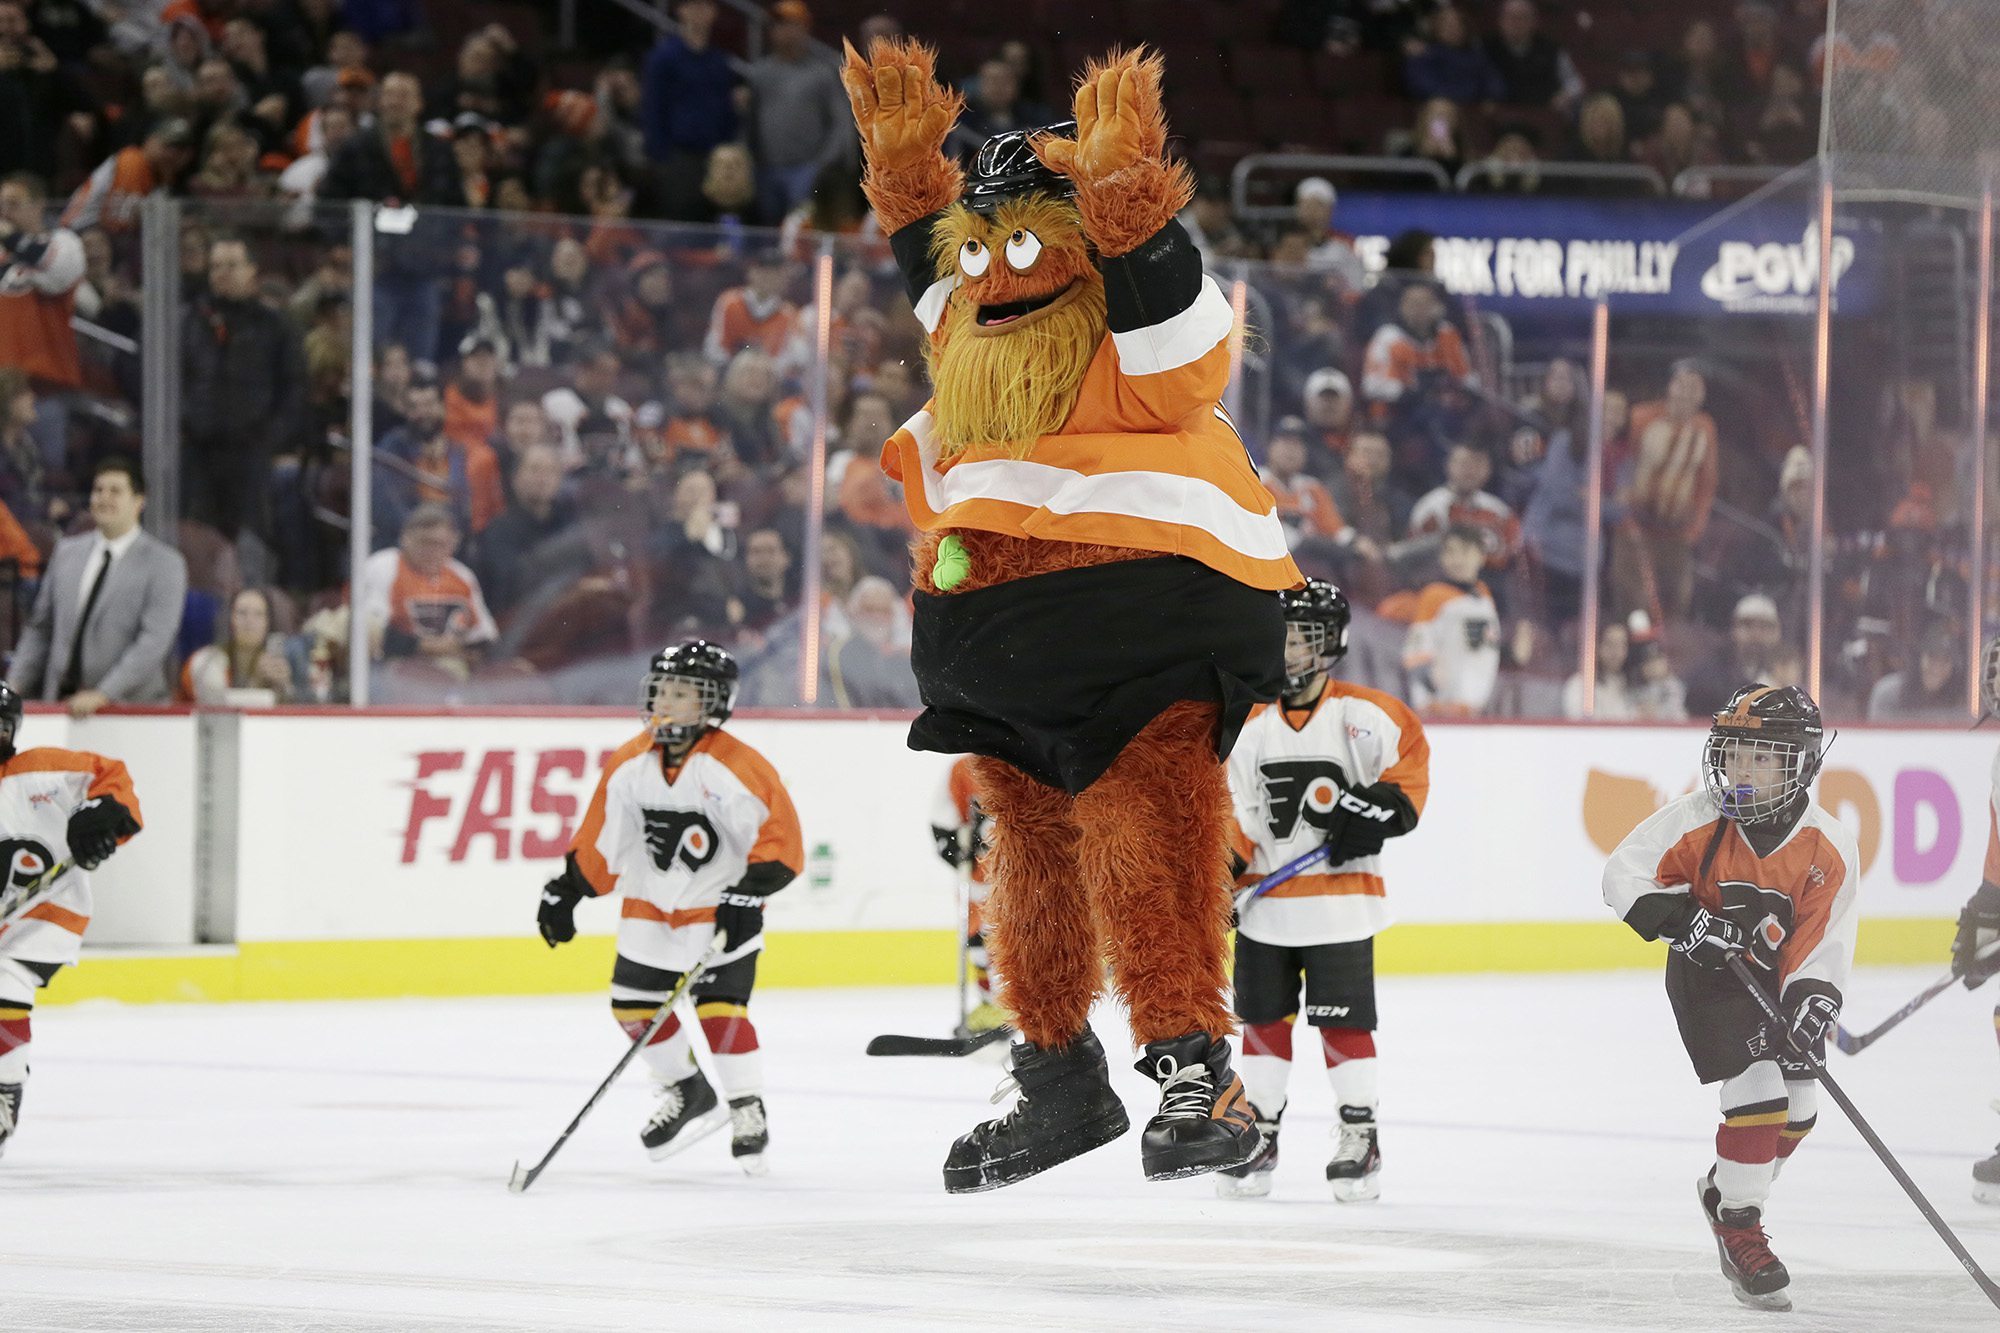 Gritty Accused of Punching 13 Year Old (UPD: No Criminal Charges